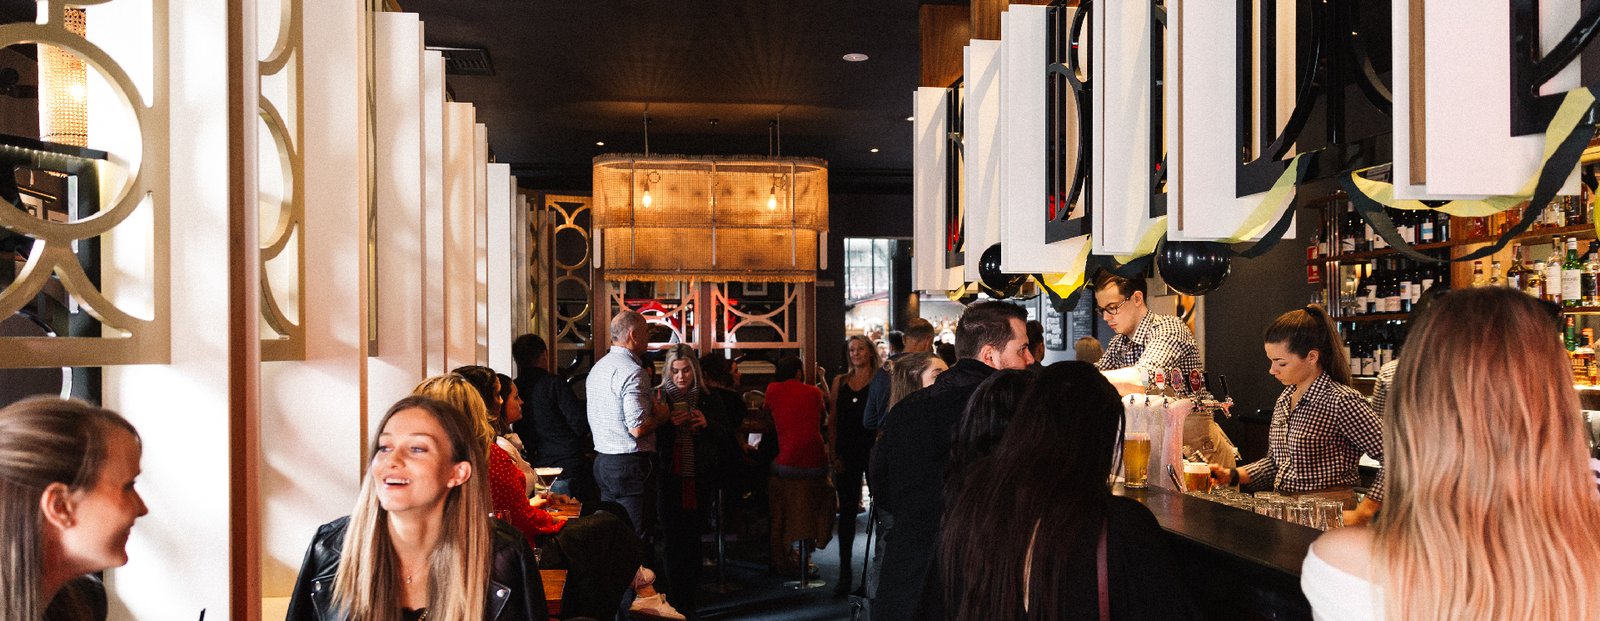 Which are the top function venues in Melbourne?